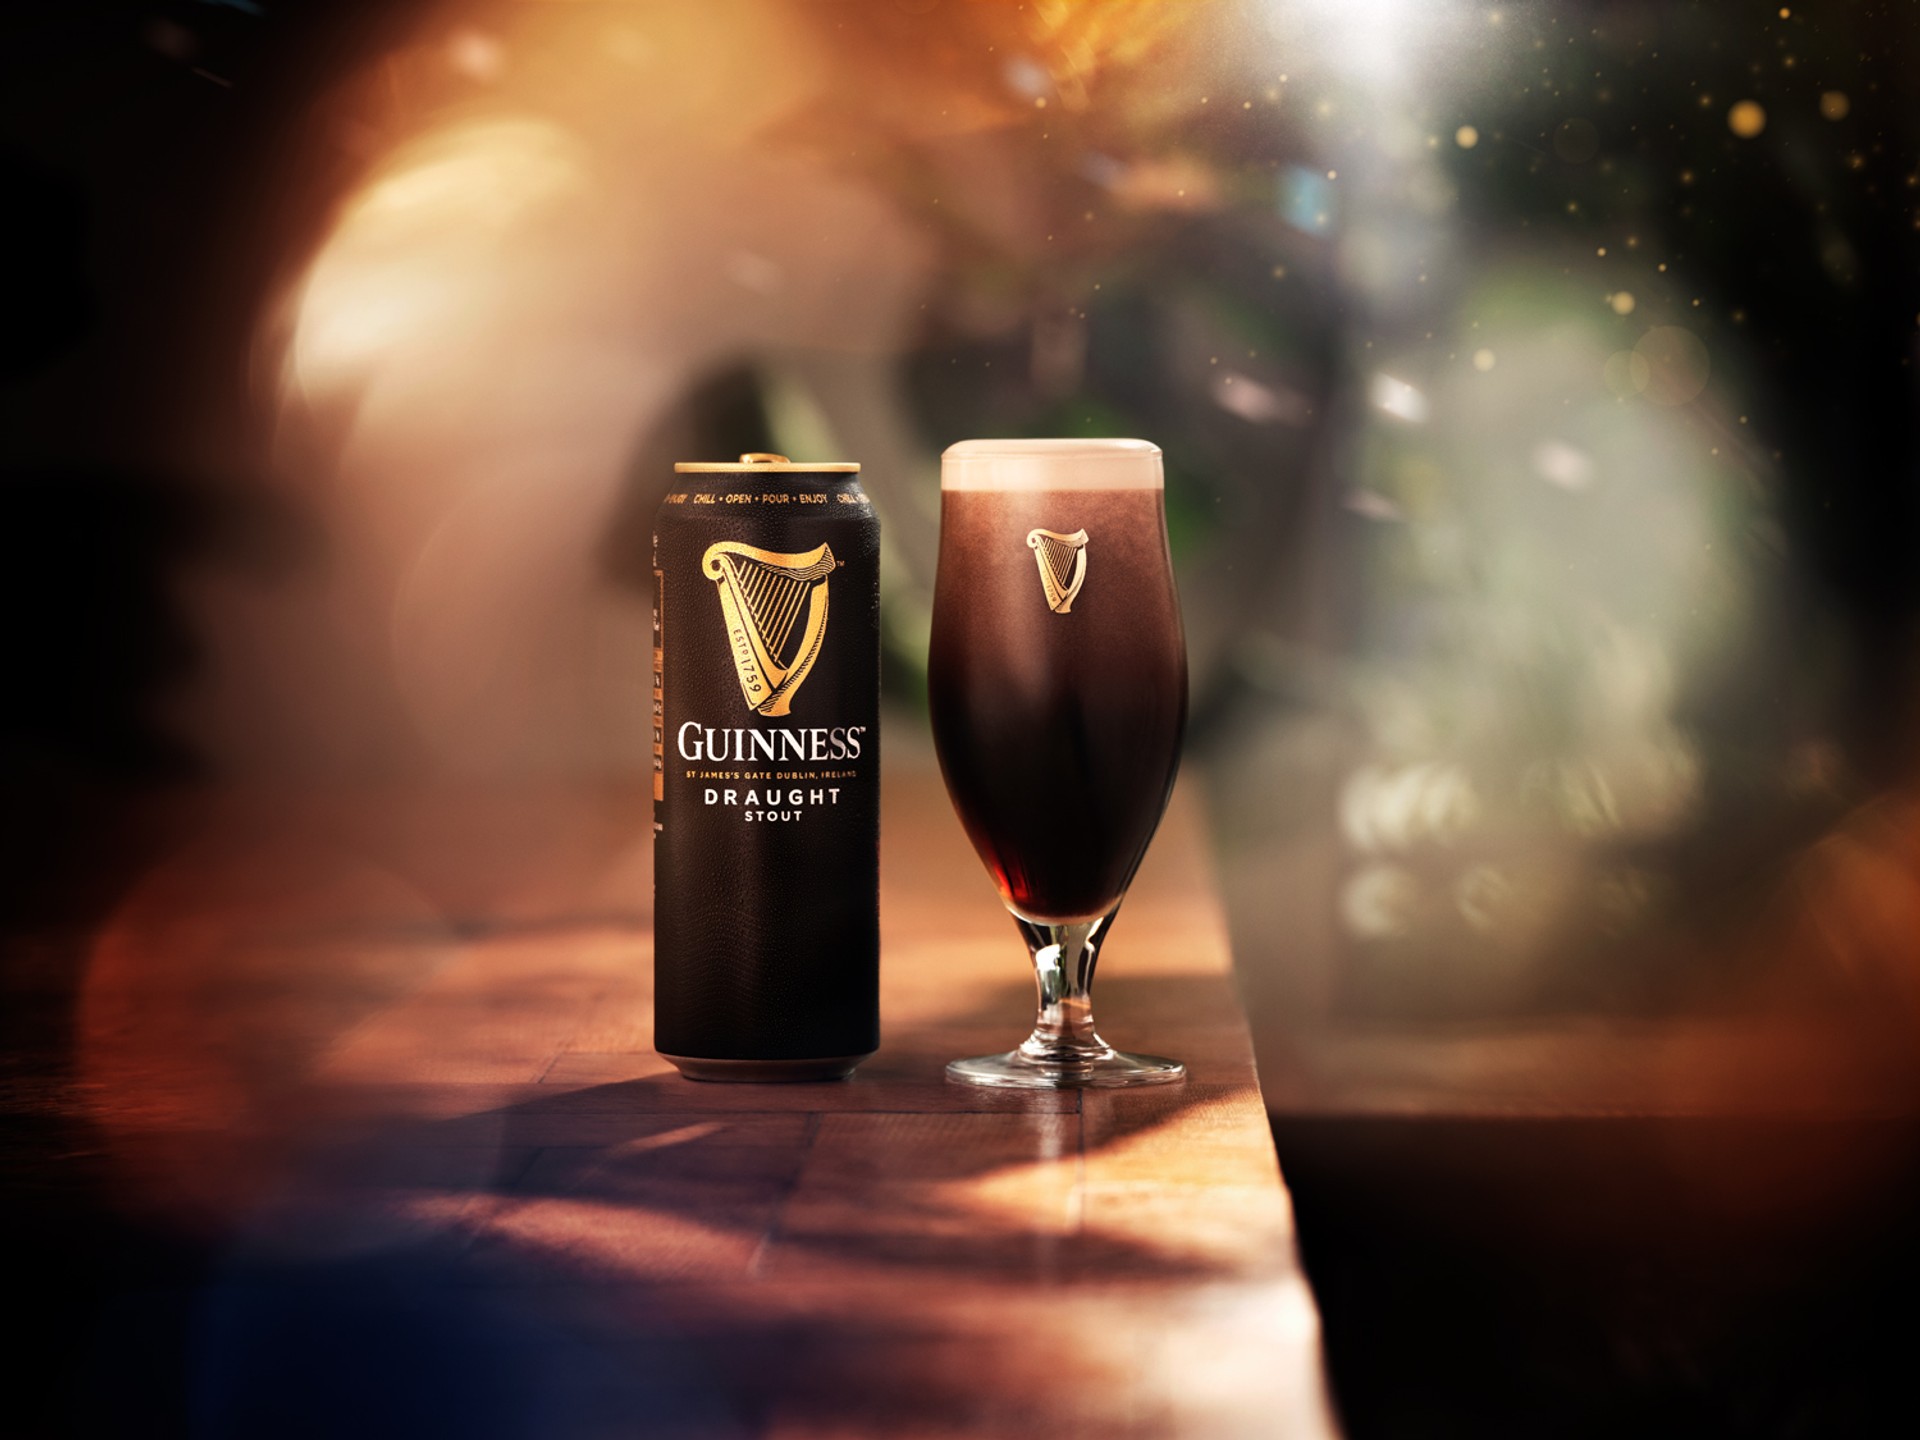 A pint of Guinness beside a can in twinkly light, photographed by Jason Bailey